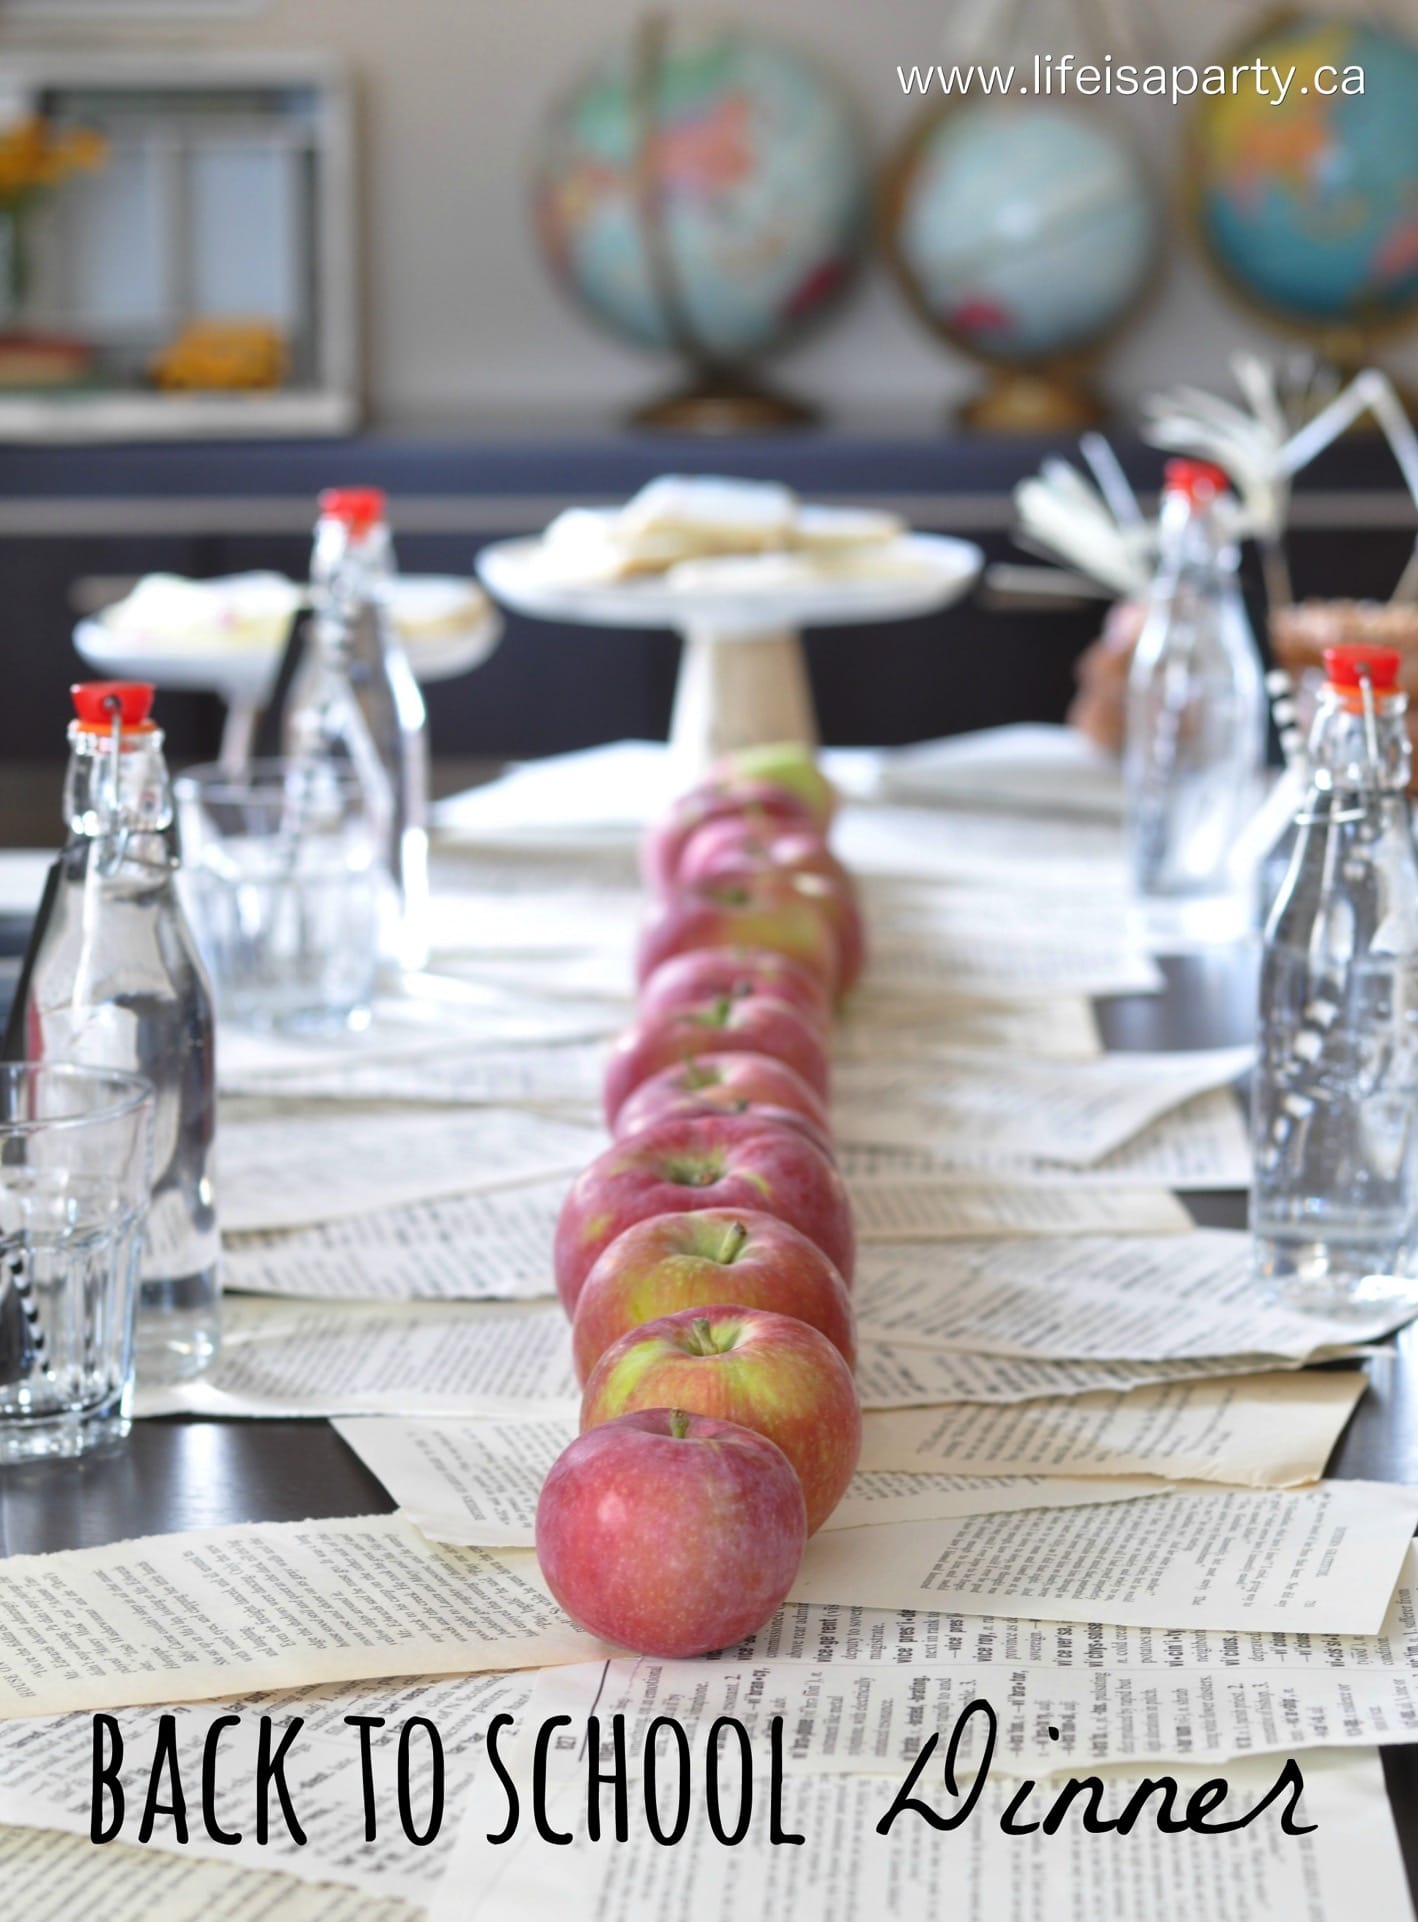 Back to School Dinner Ideas: a wonderful family tradition of a special Back to School dinner to celebrate the first day of school and hear all about it.